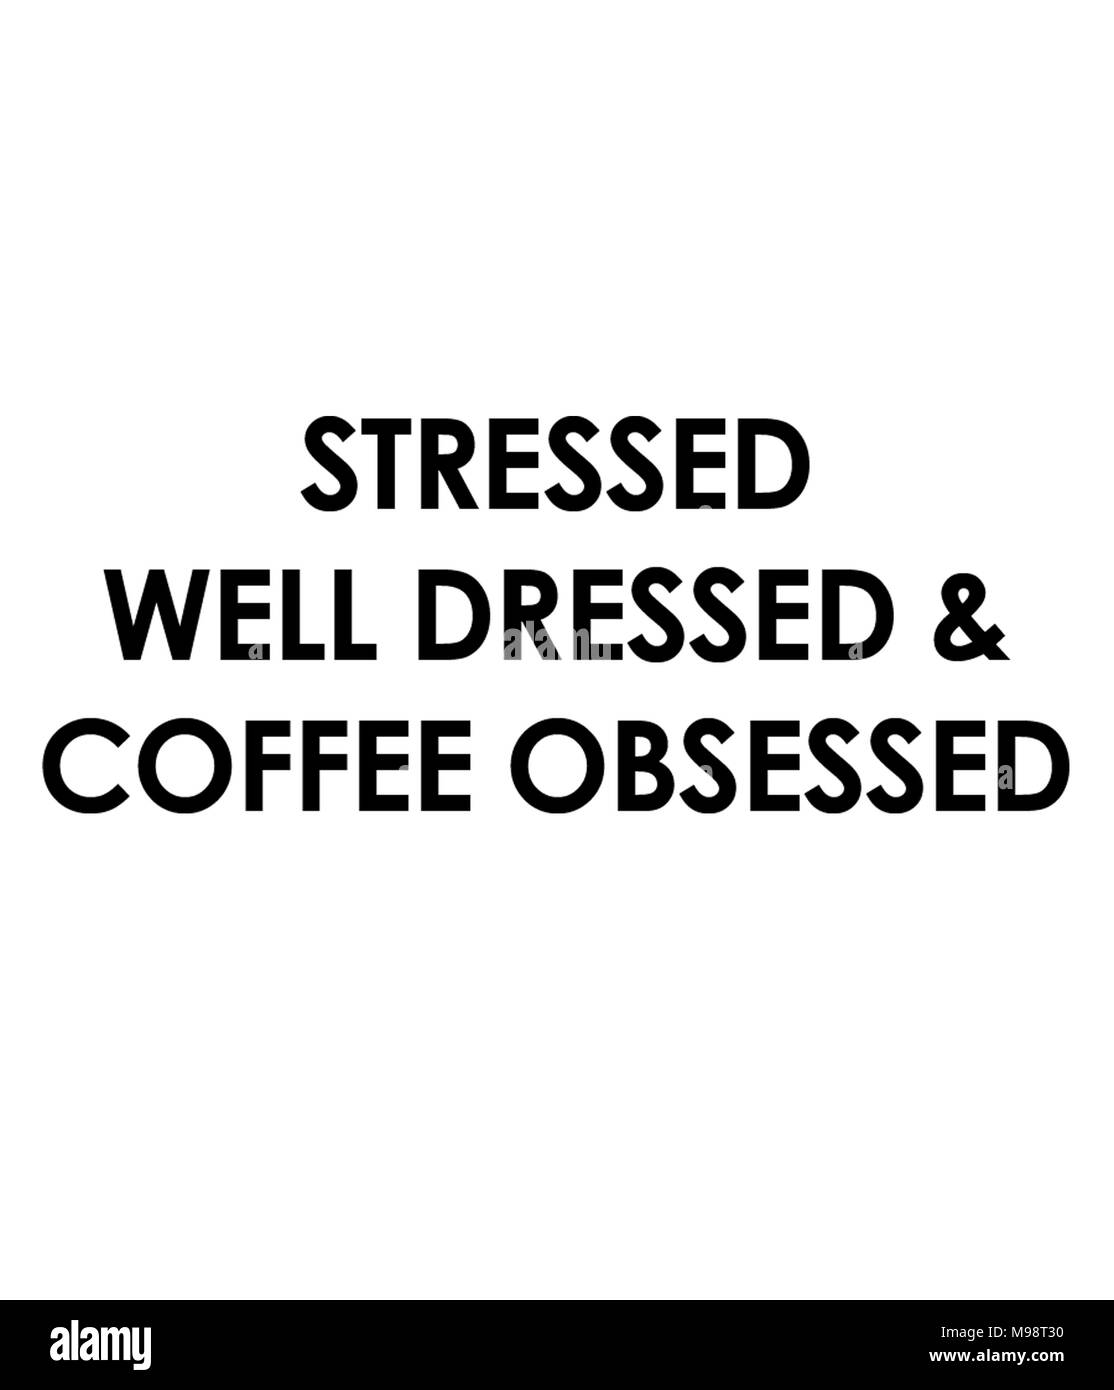 Stressed Well Dressed & Coffee Obsessed Stock Photo